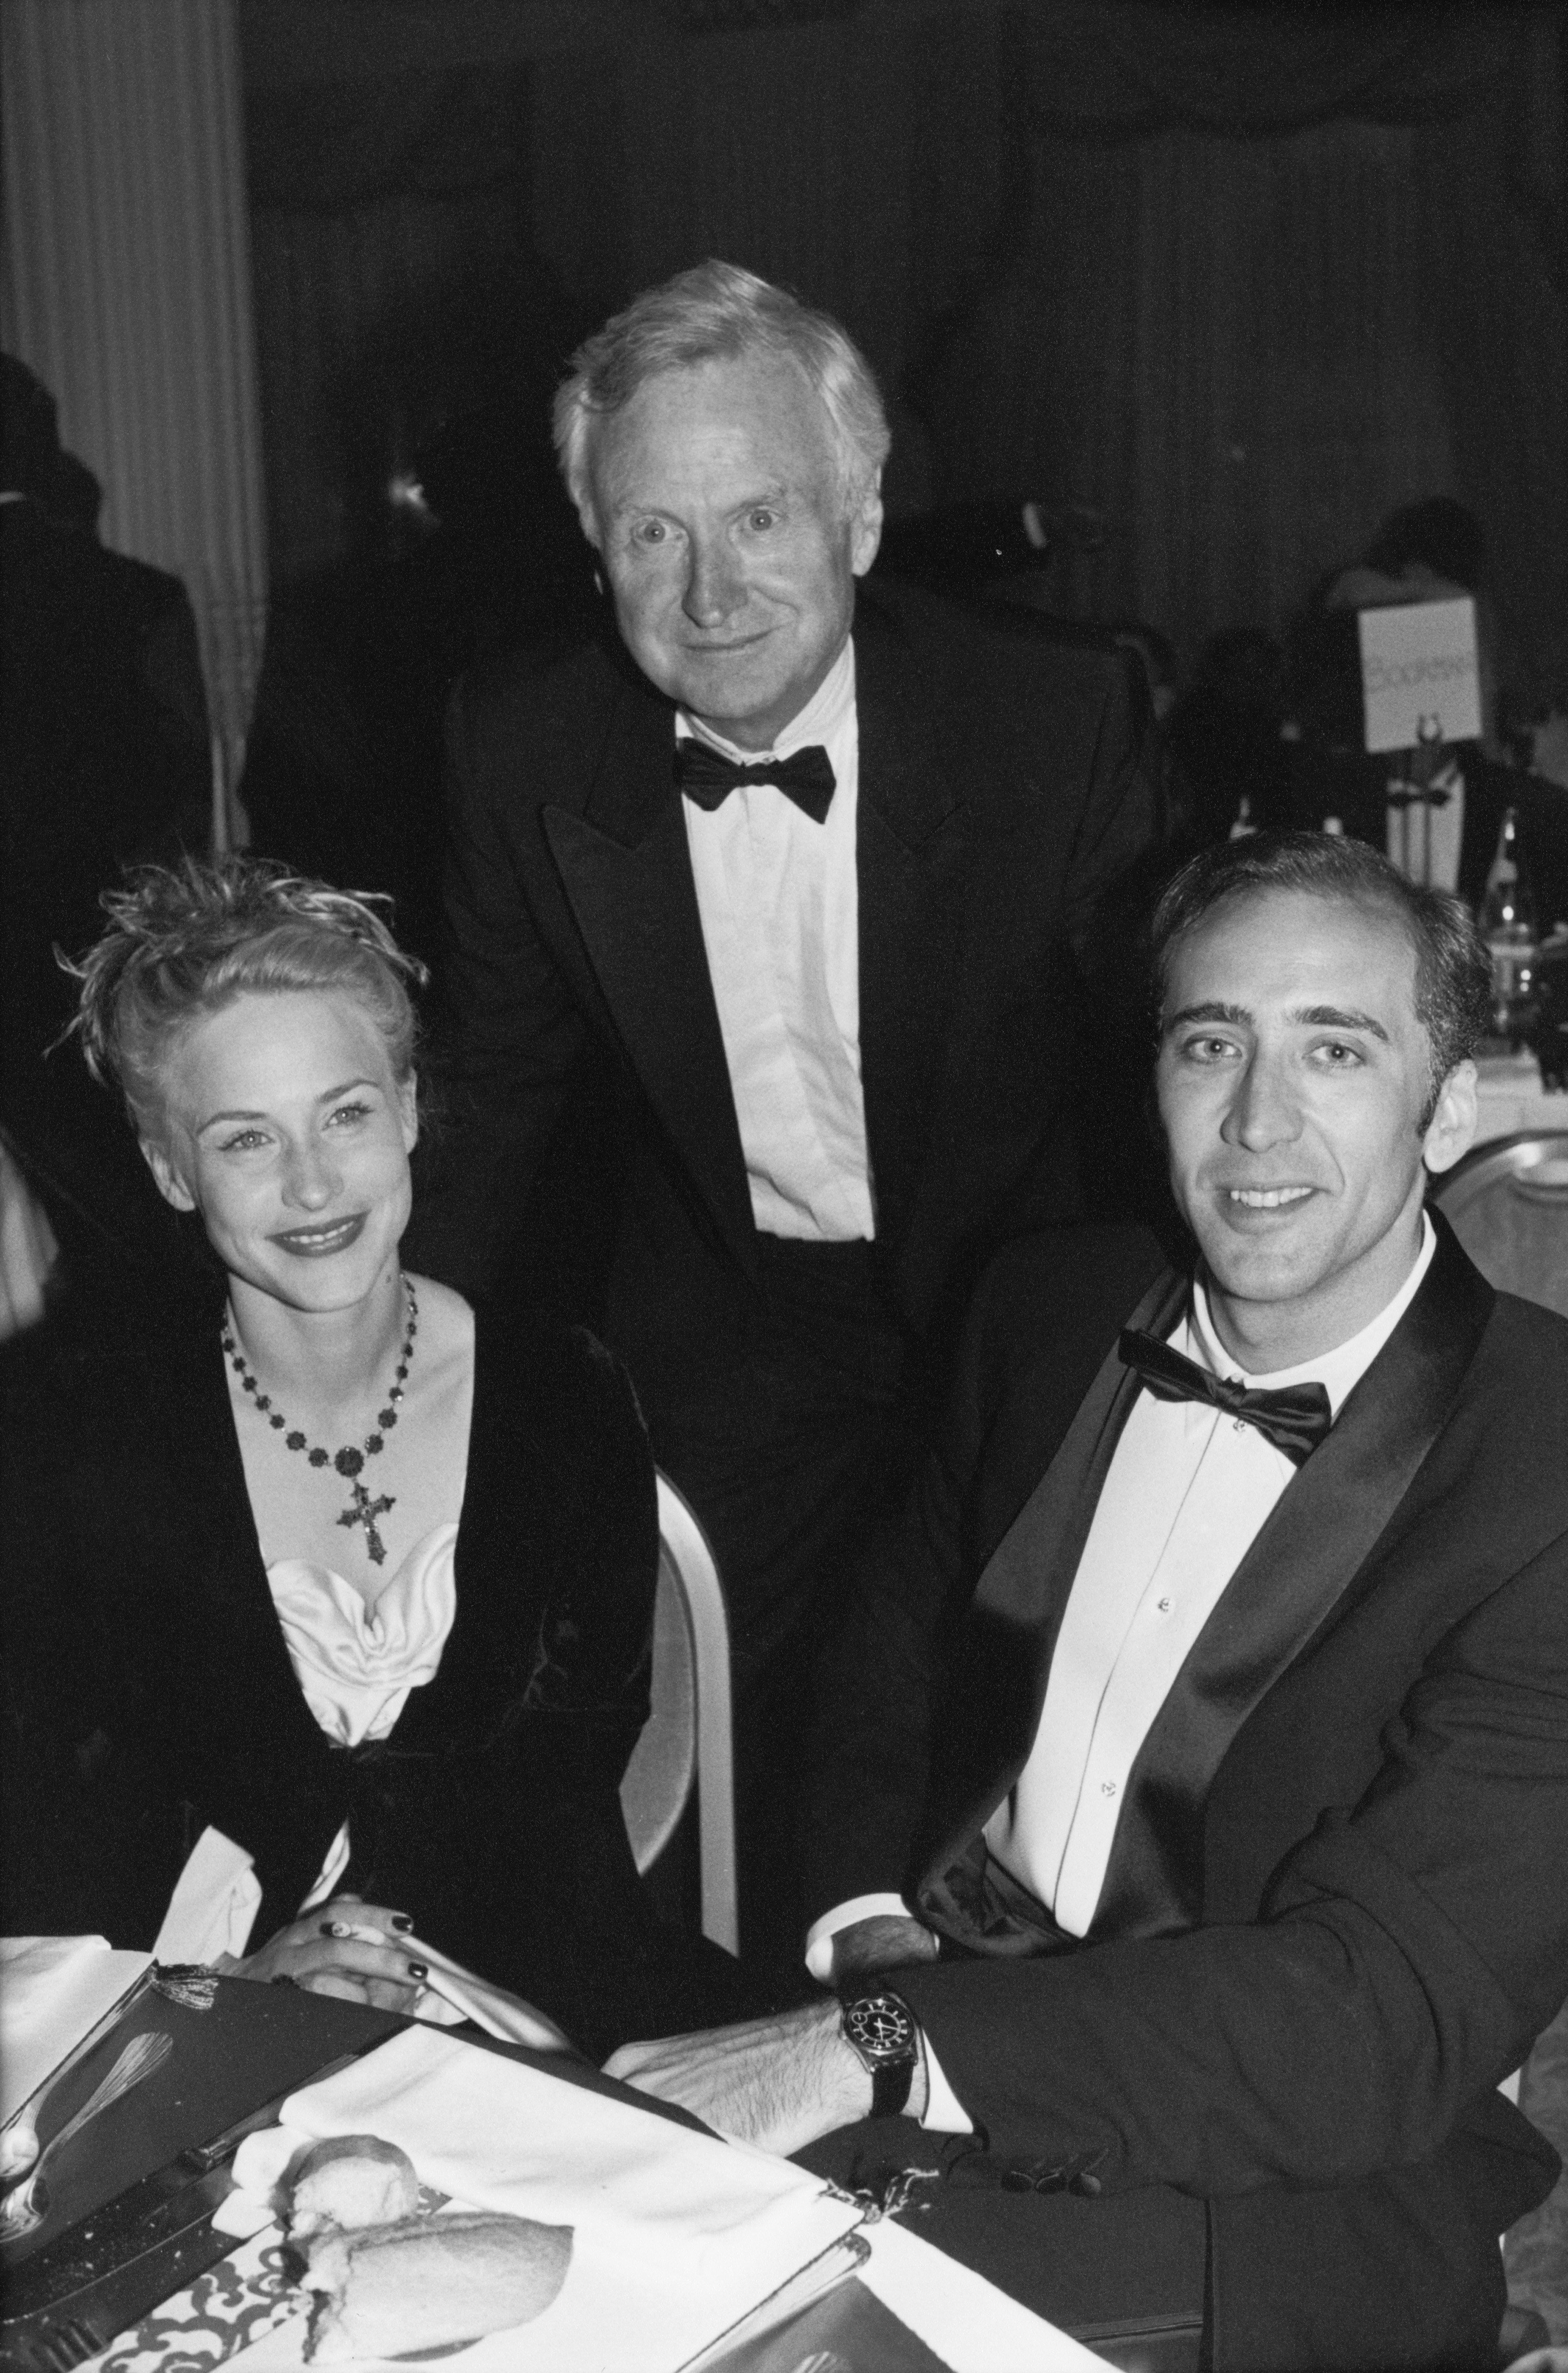 Patricia Arquette, John Boorman, and Nicolas Cage during the Cannes Film Festival on May 19, 1995. | Source: Richard Blanshard/Getty Images